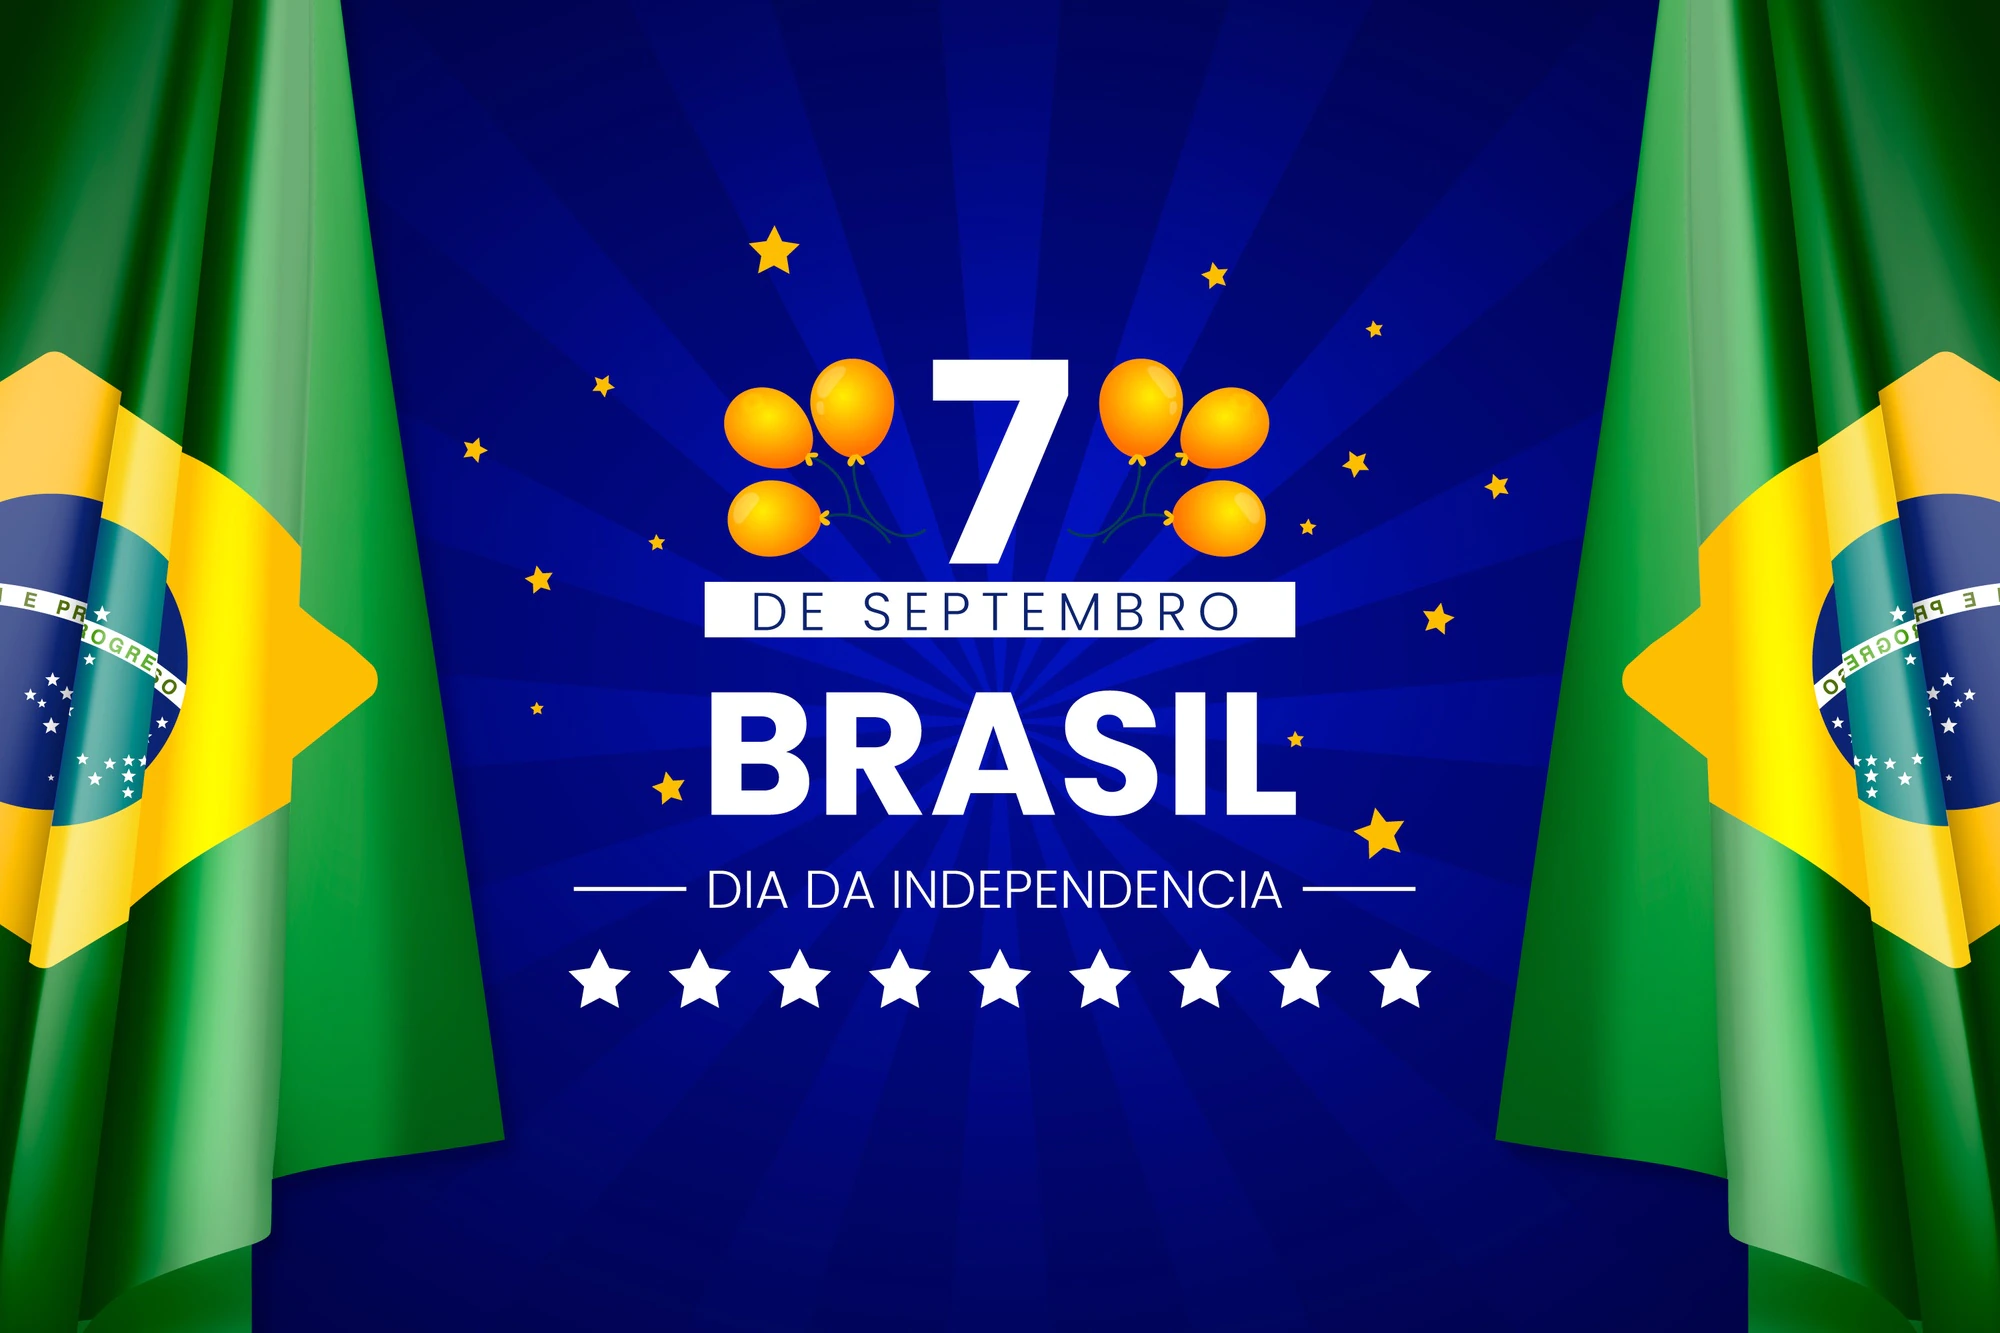 Brazil Independence Day 2022: Greetings, Quotes, Wishes, Images, Messages, Pictures, Slogans to on 'Sete de Setembro'